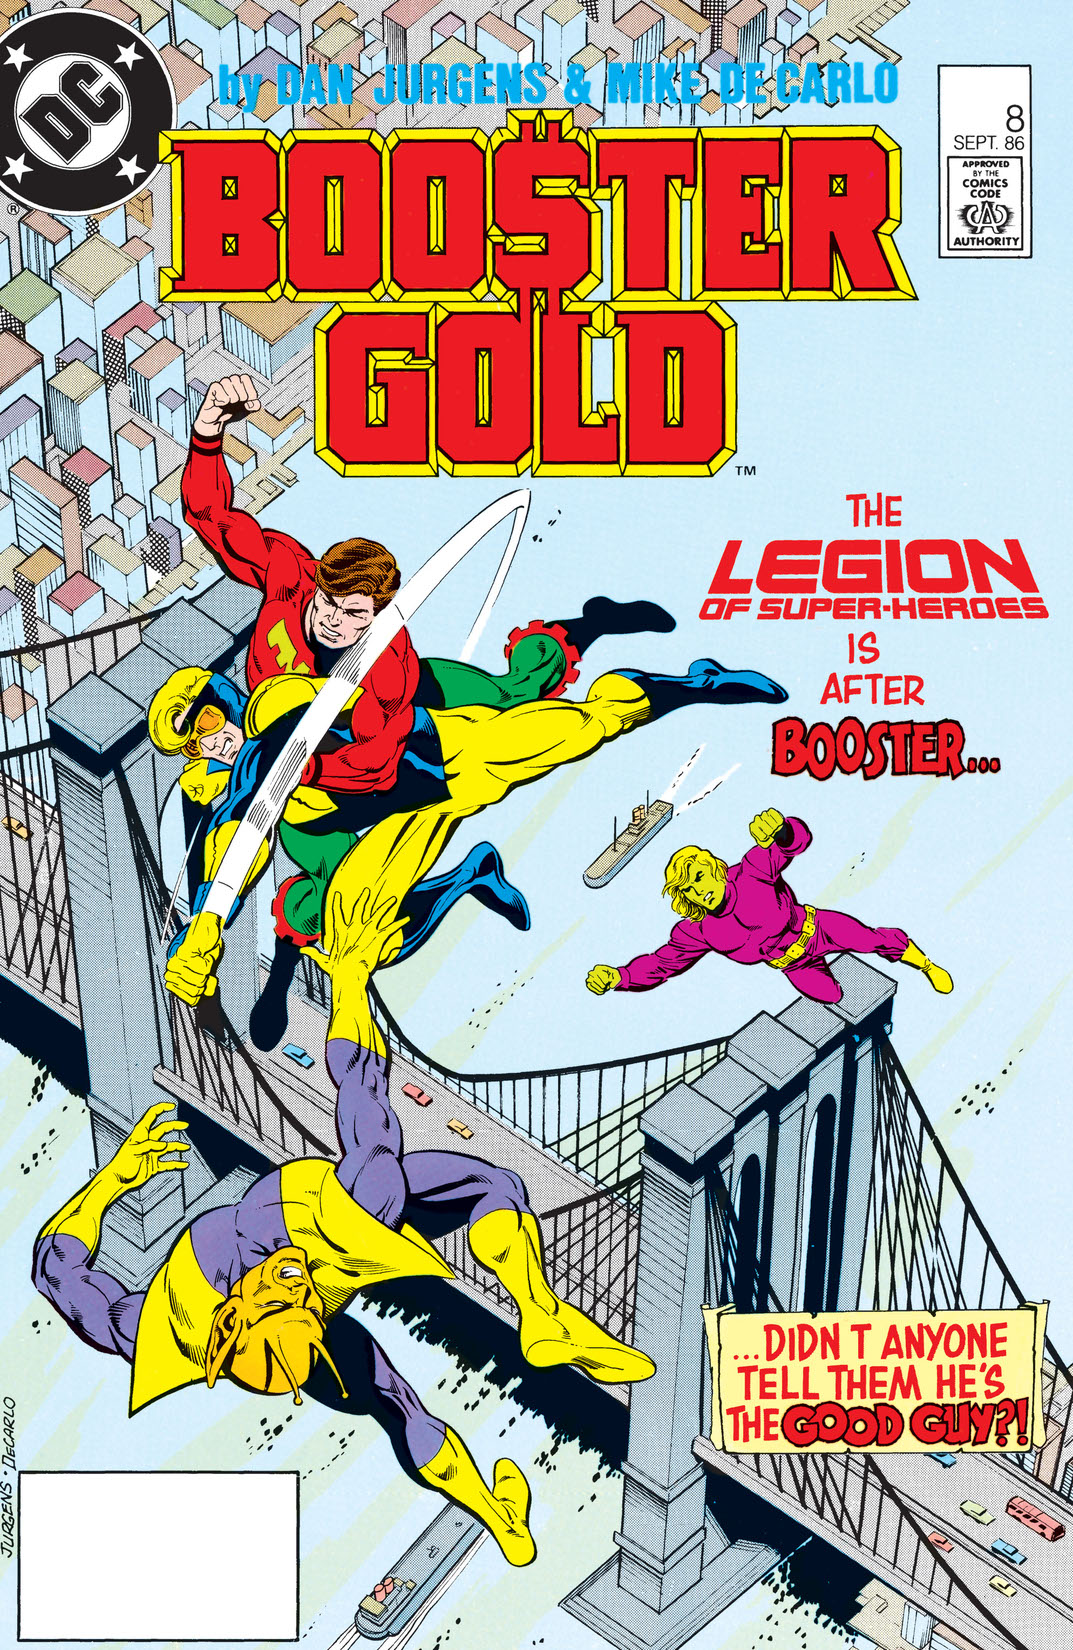 Booster Gold (1985-) #8 preview images